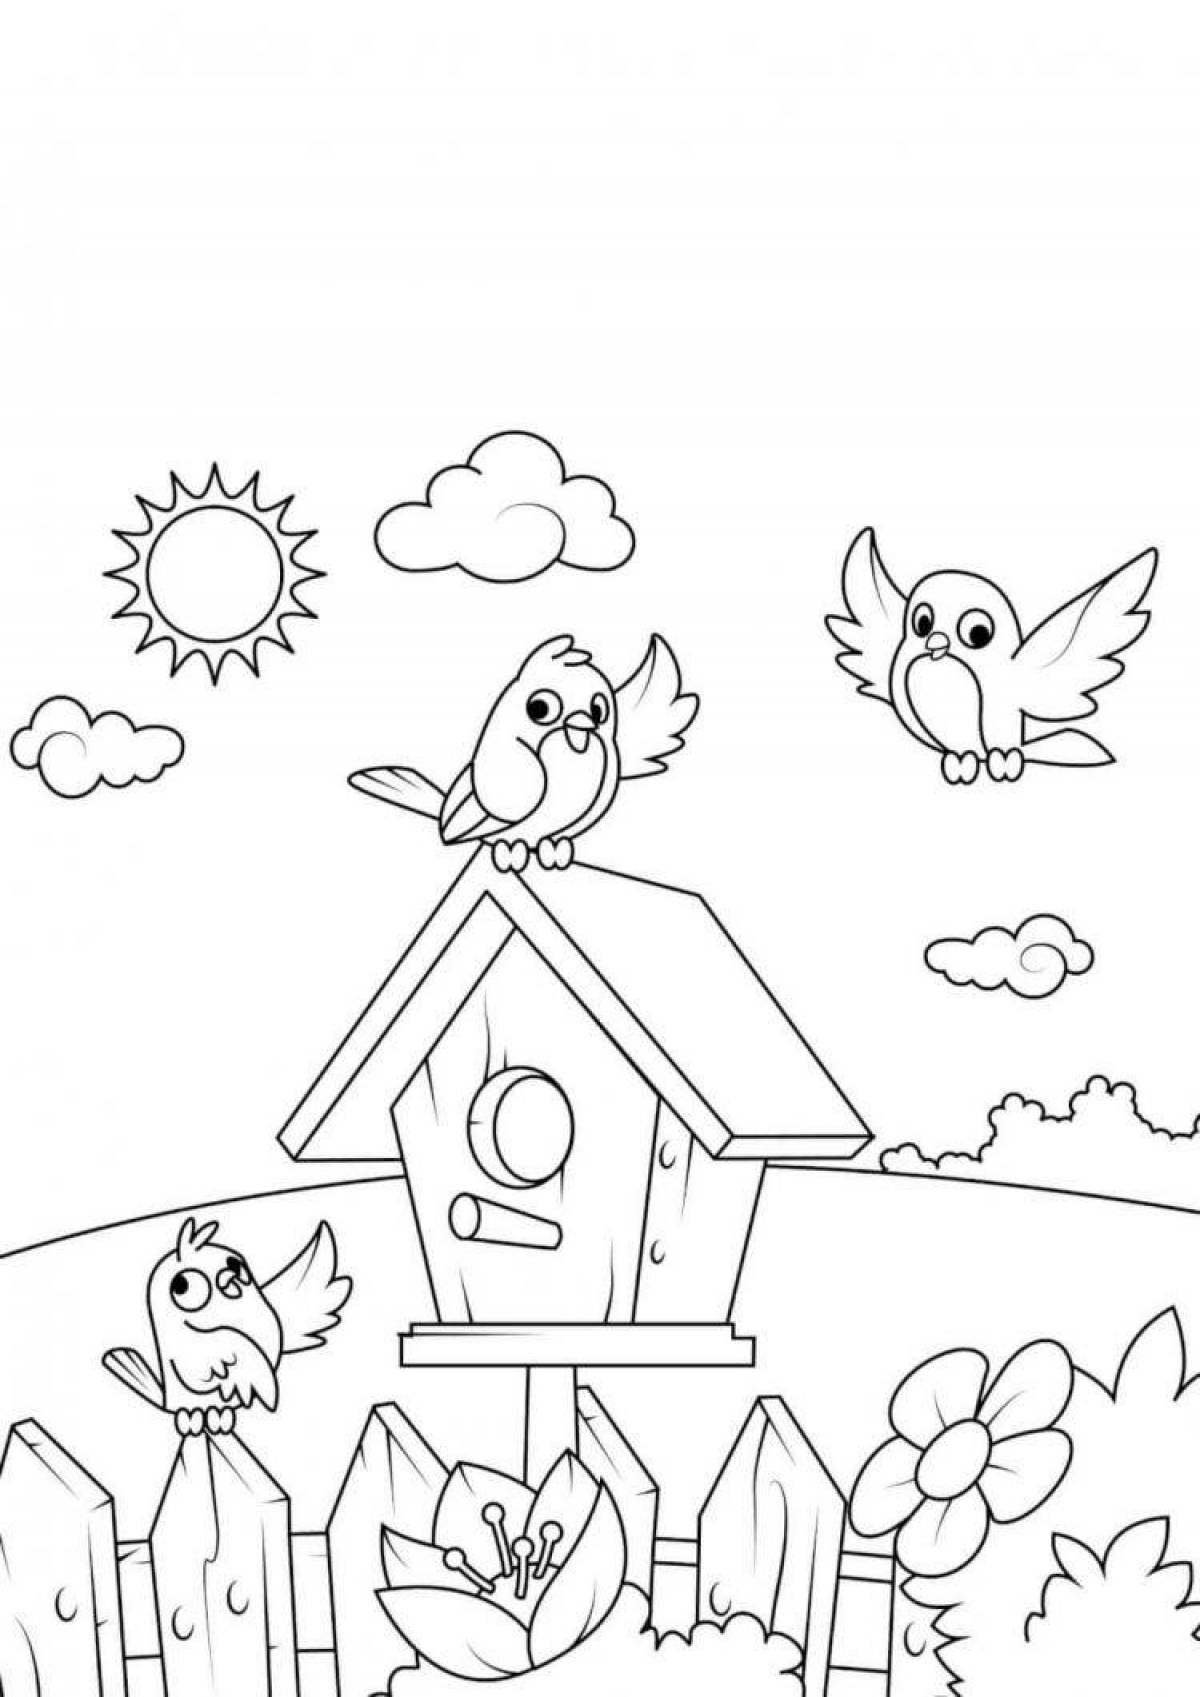 Magic birdhouse coloring page